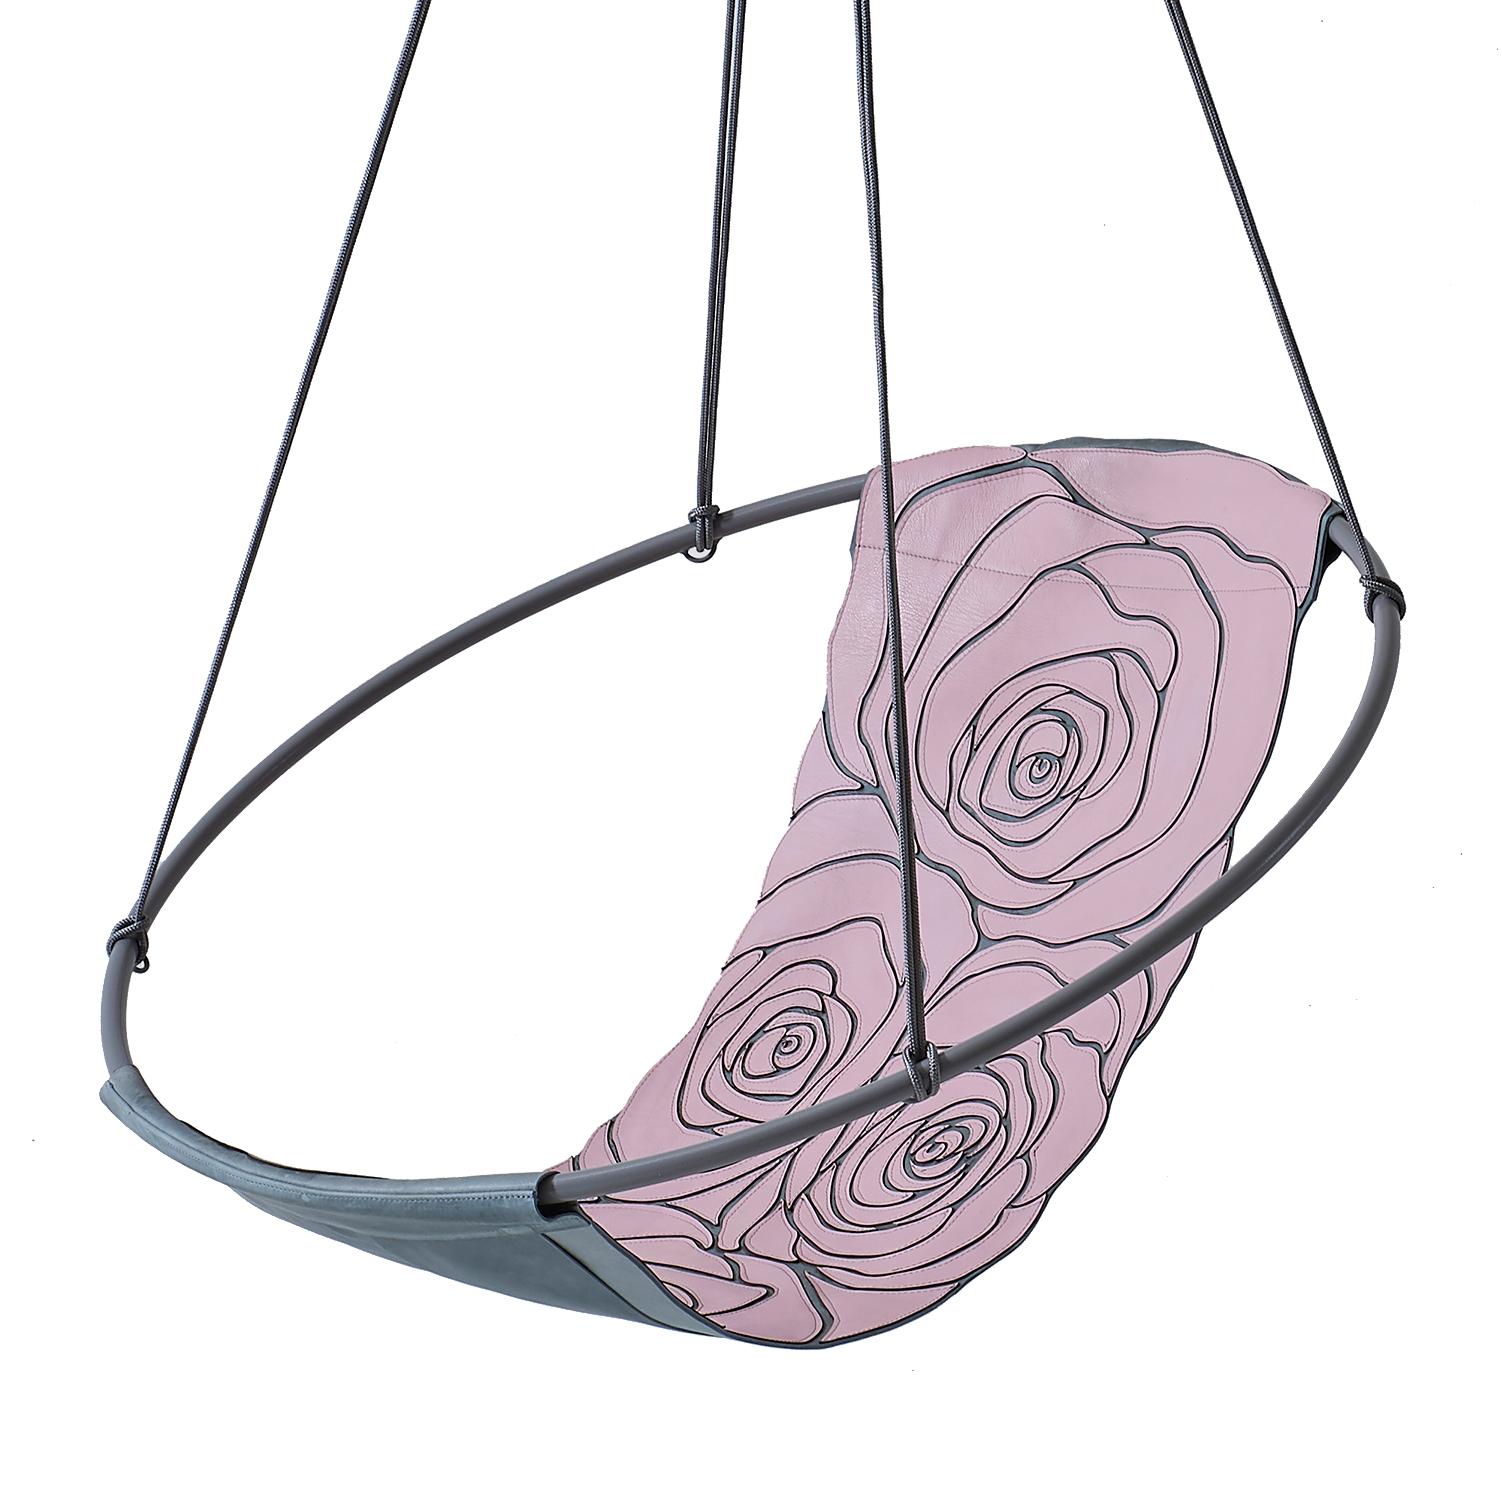 pink hanging chair